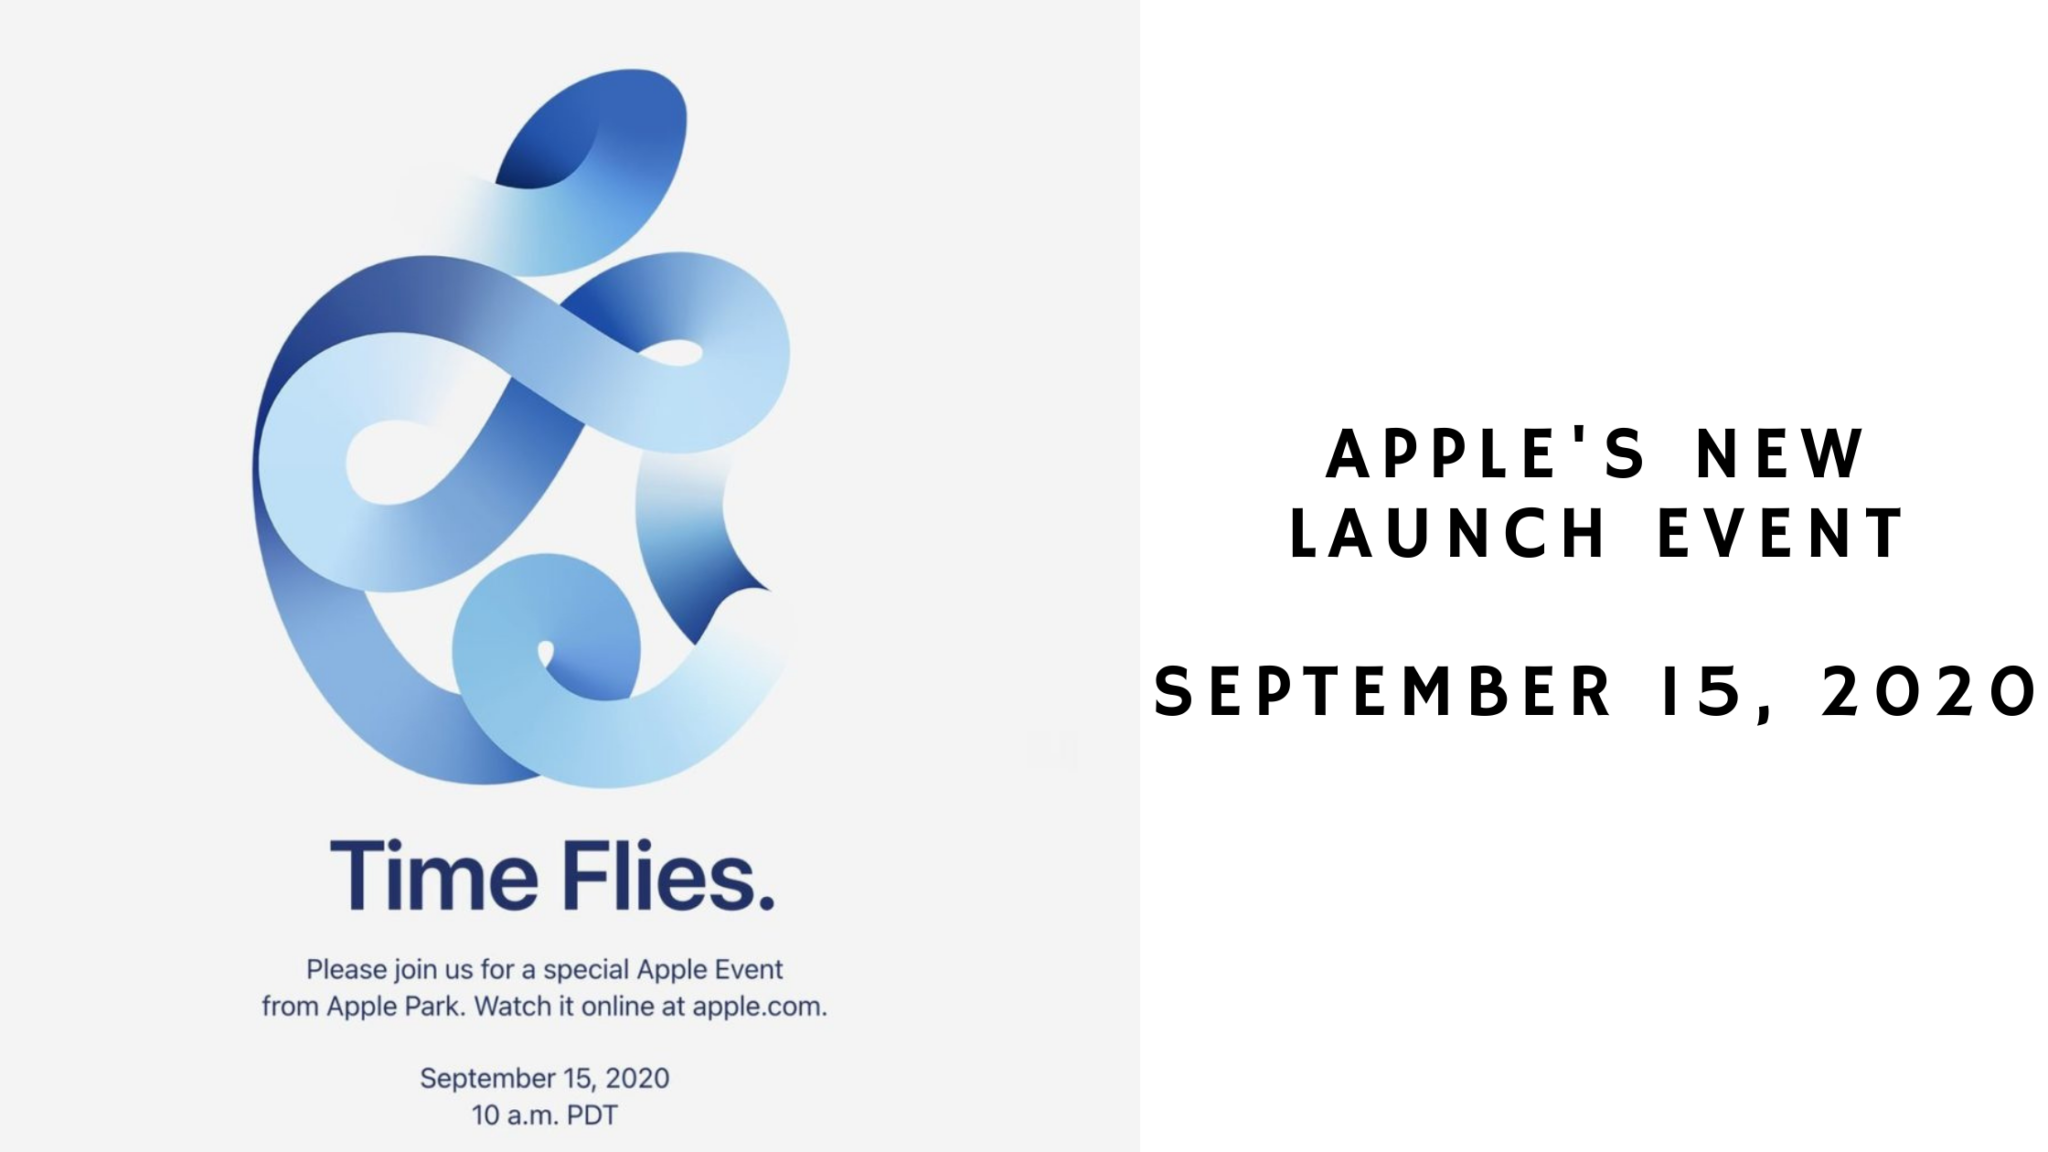 Apple has a new launch event set for September 15